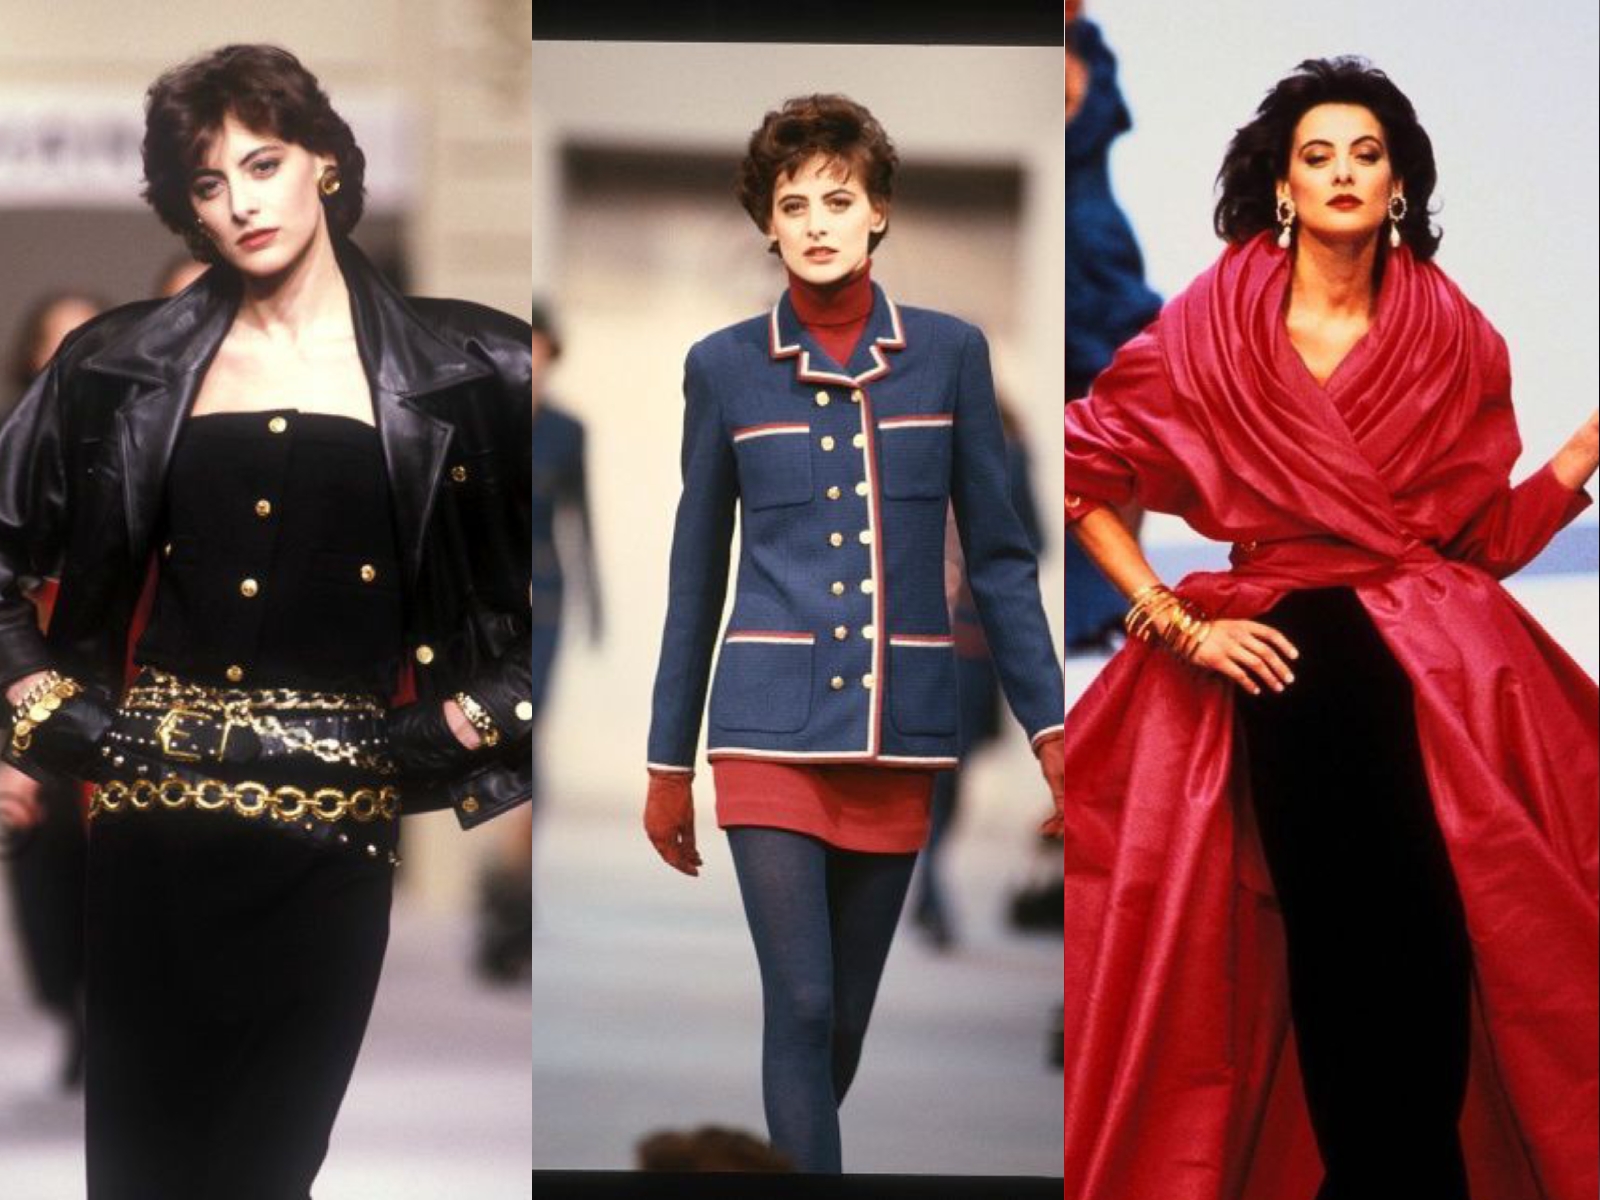 Top Models From The Past: Where Are They Now? – StyleCaster